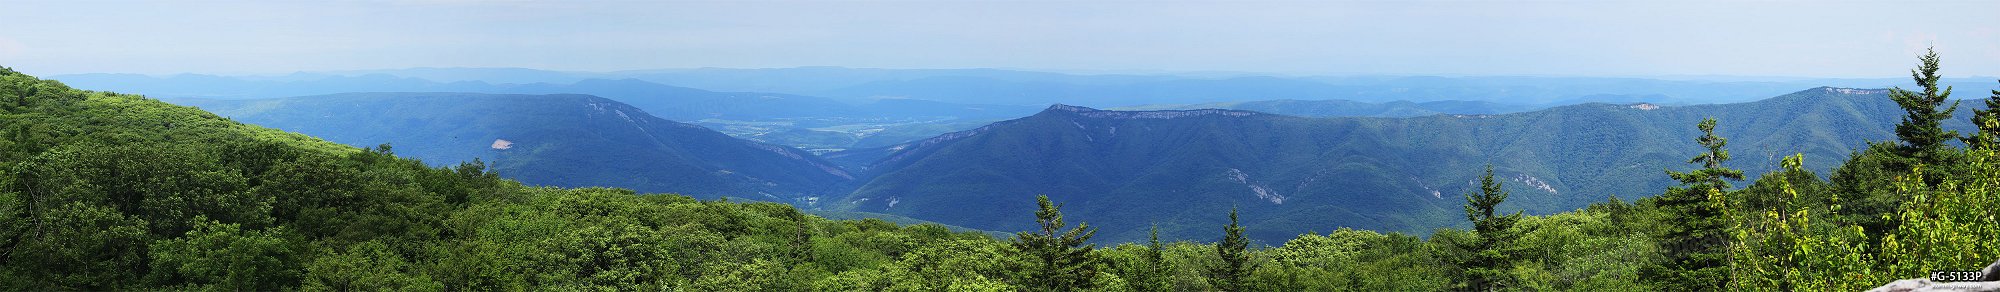 Dolly Sods panorama